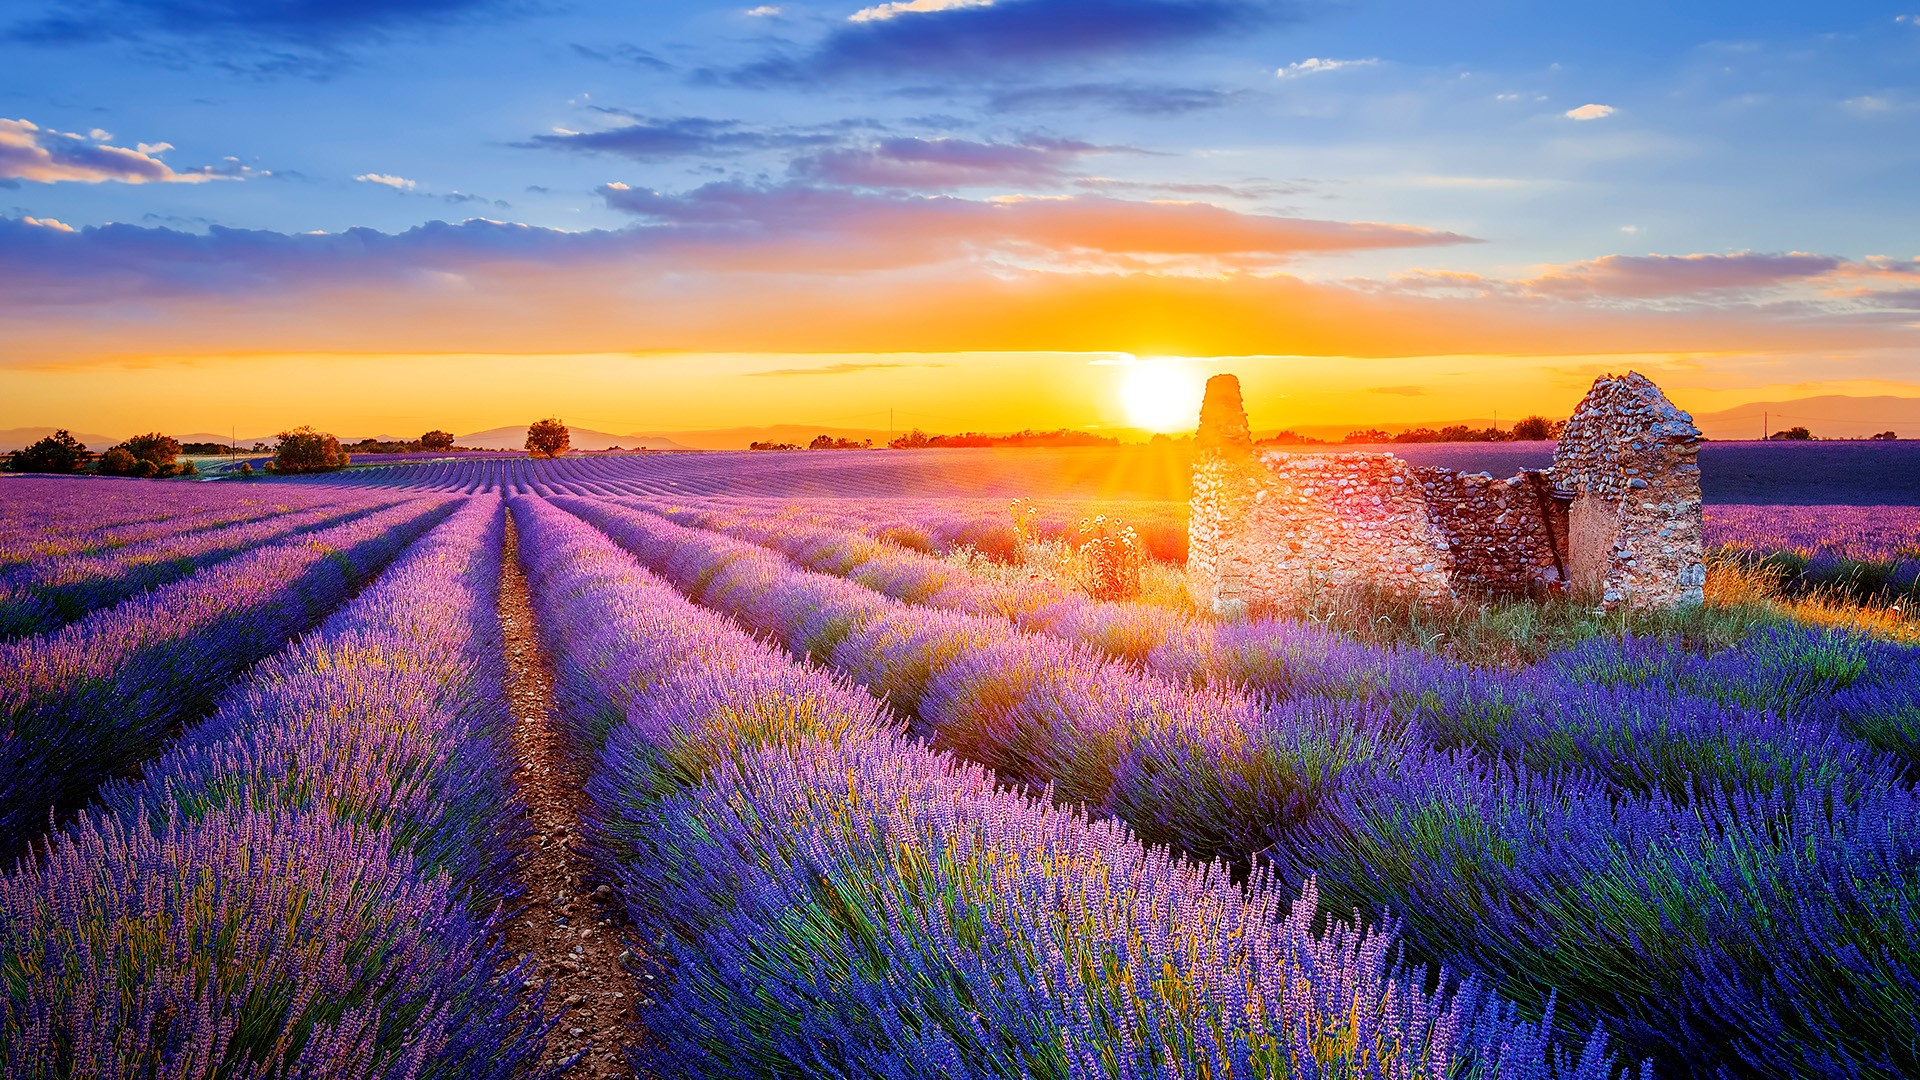 Setting sun over lavender filed in Valensole, Provence, France ...